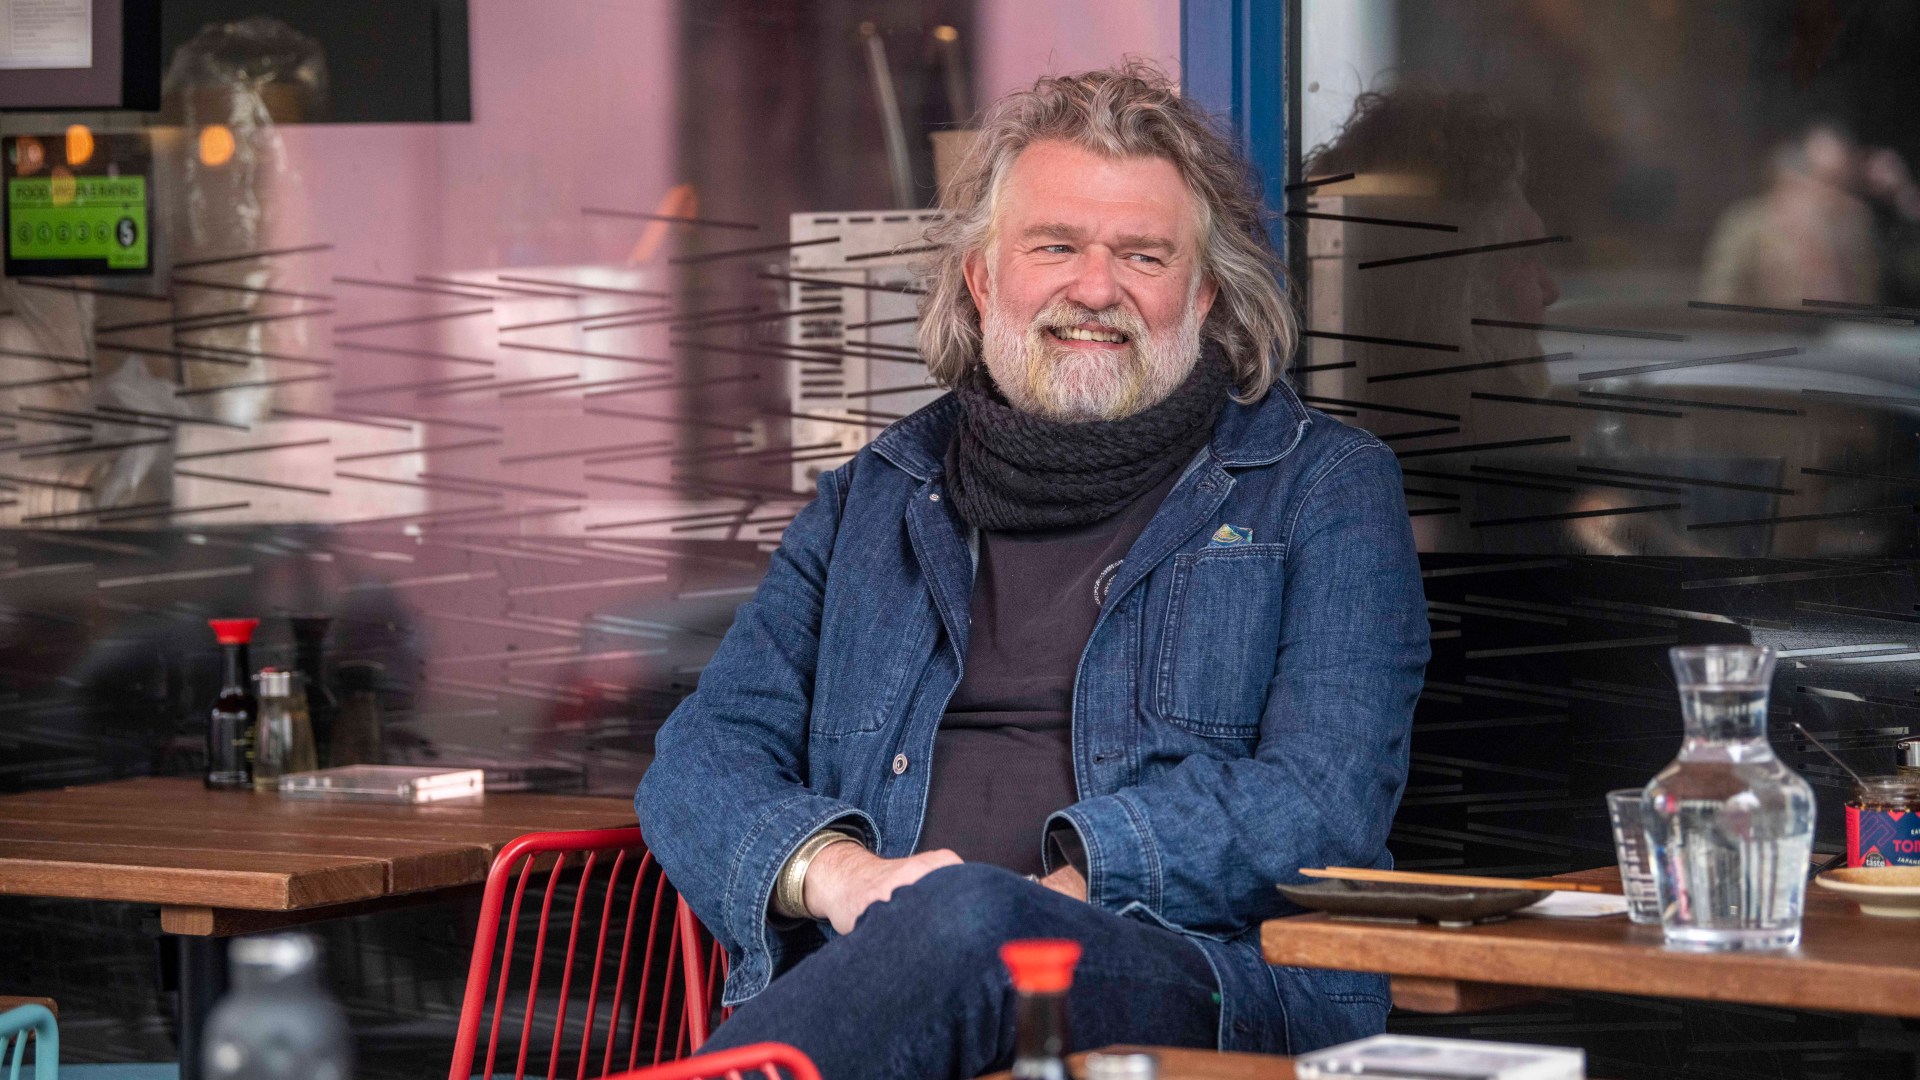 Hairy Bikers star Si King is seen for the first time since the death of his close friend Dave Myers